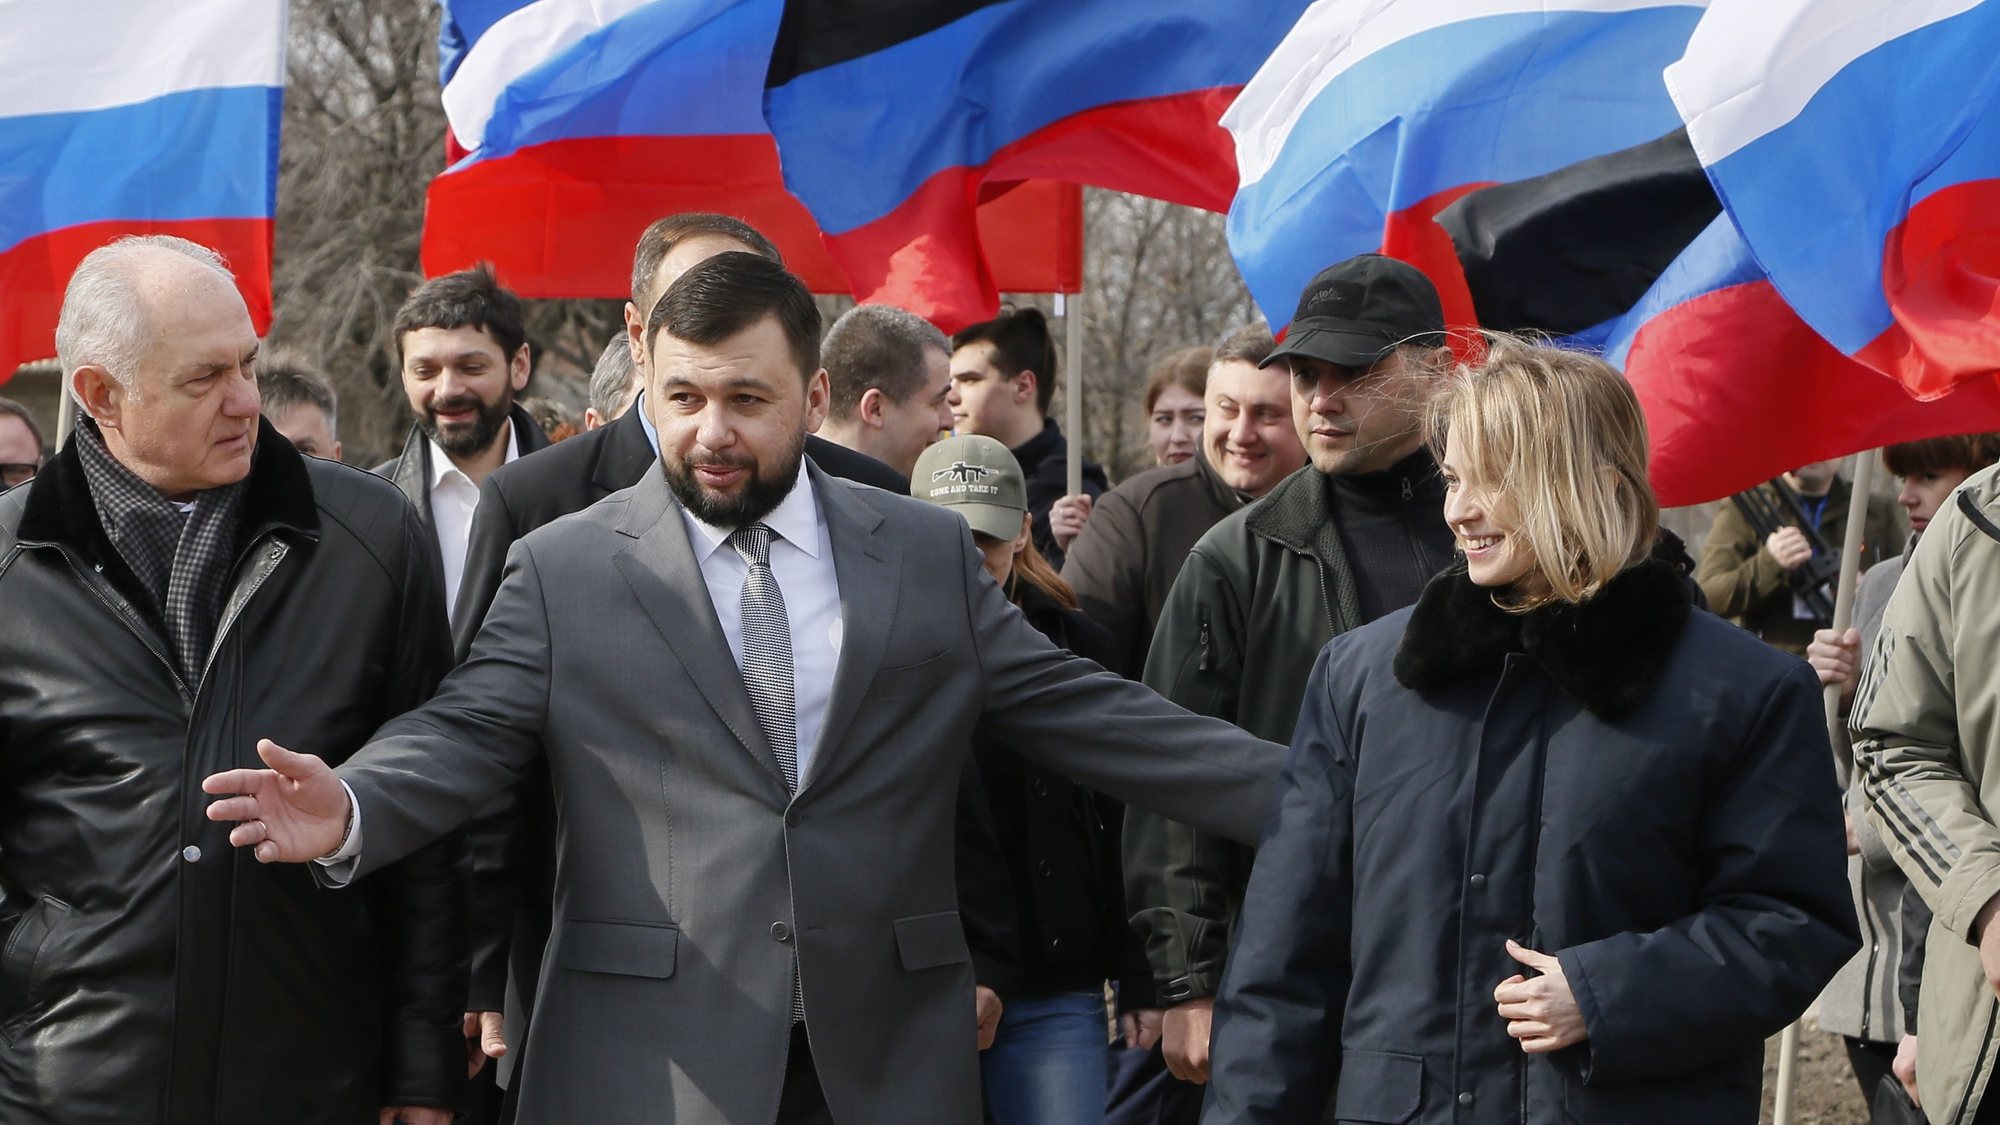 epa07456360 Natalia Poklonskaya (R), member of Russian parliament and former Crimean Prosecutor Chief and Denis Pushilin (L), the head of the self-proclaimed Donetsk People&#039;s Republic (DNR) take part in unveiling ceremony of commemorative plate dedicated to 5th anniversary of Russian Spring and annexation of Crimea in the separatist-held Makeevka city in Donetsk area, Ukraine, 22 March 2019.  EPA/DAVE MUSTAINE